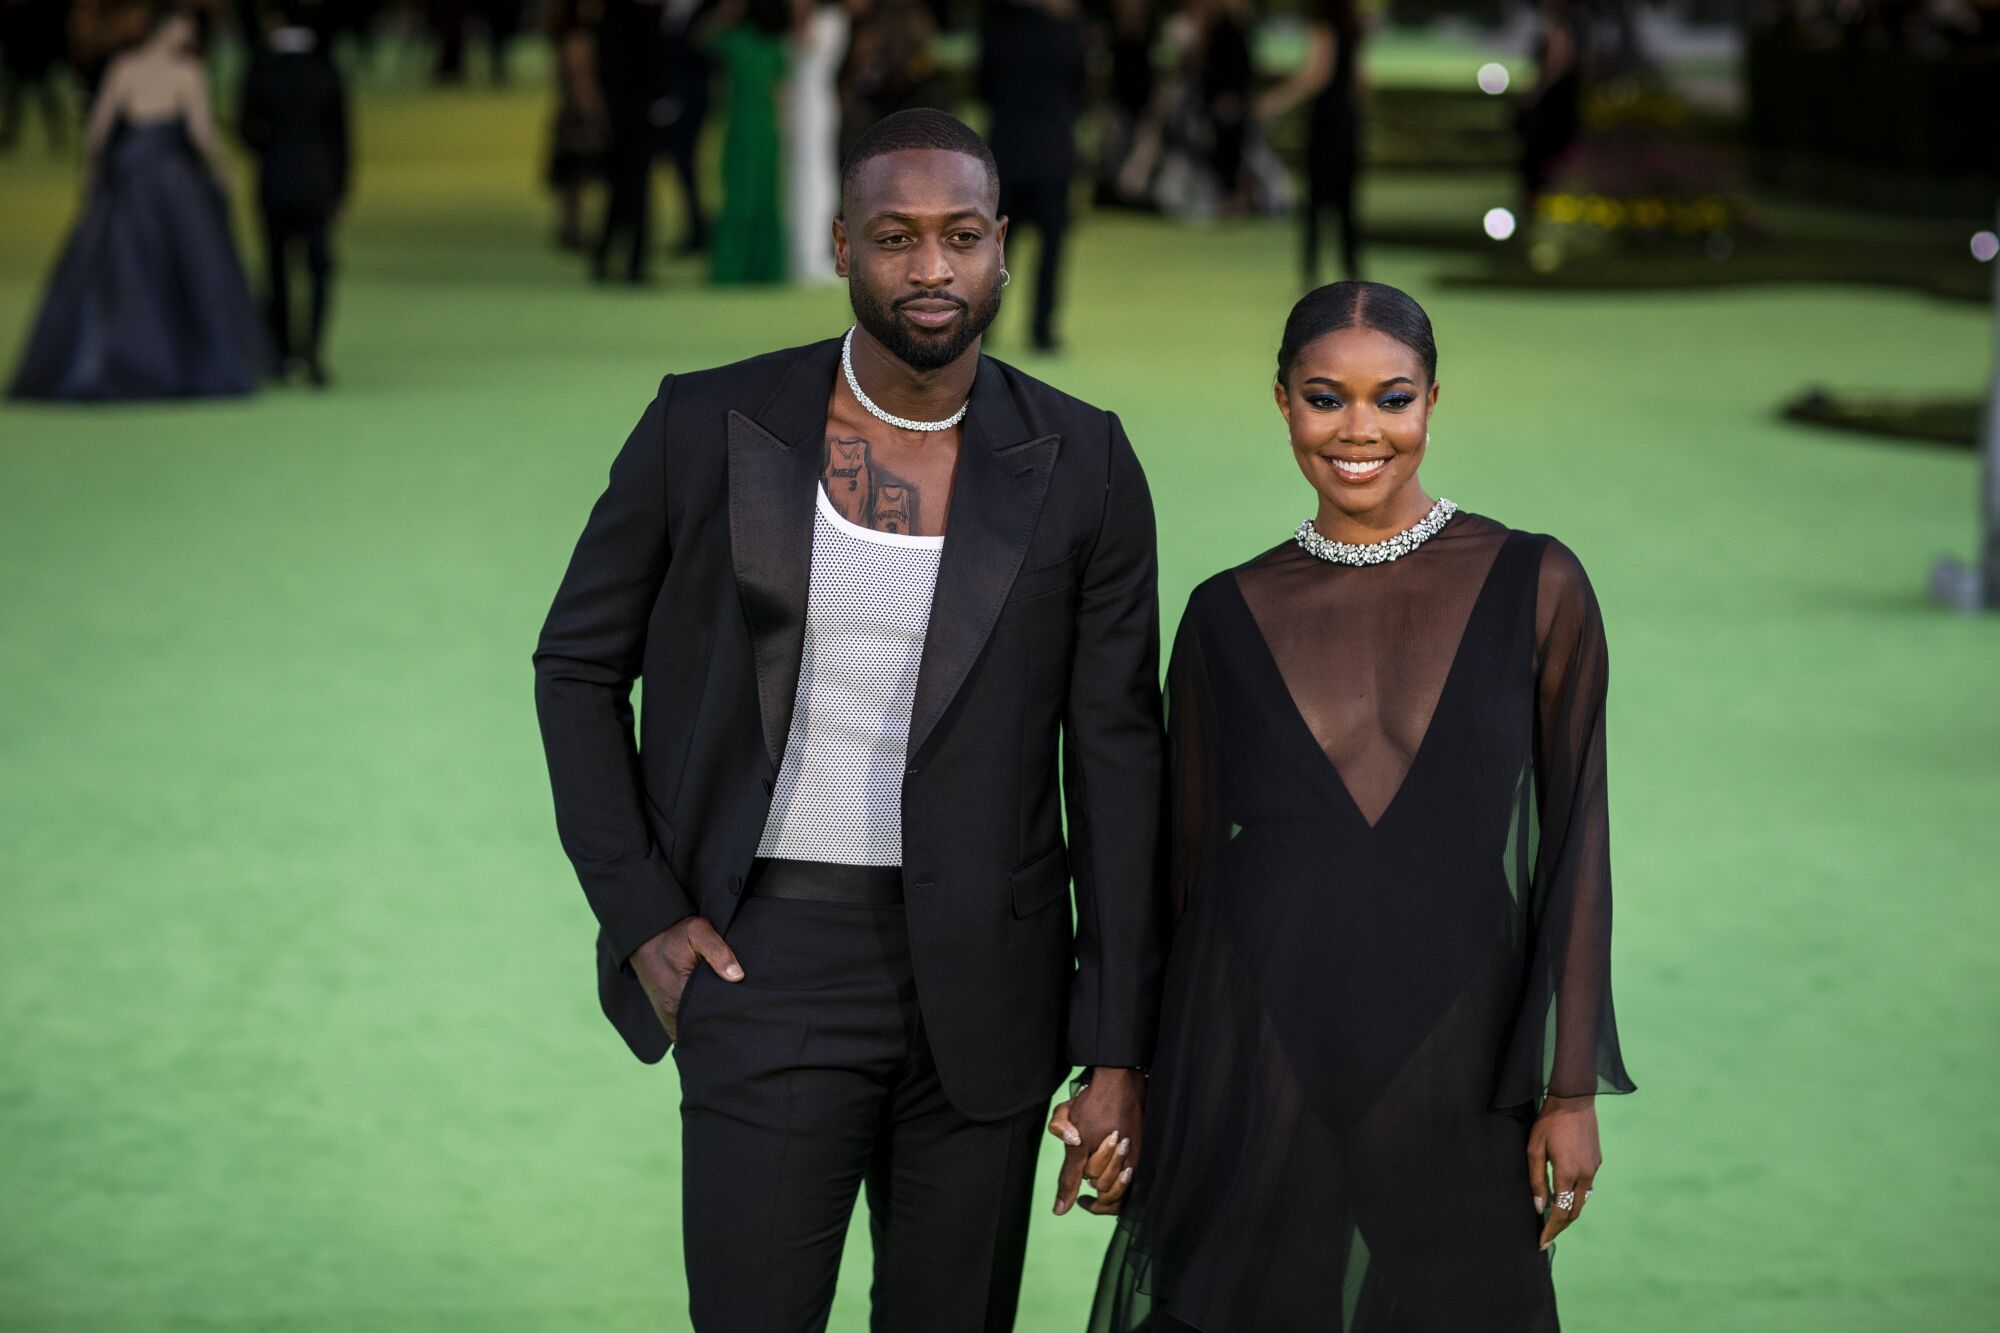 A man in a black suit and a woman in a black dress posing on a green carpet